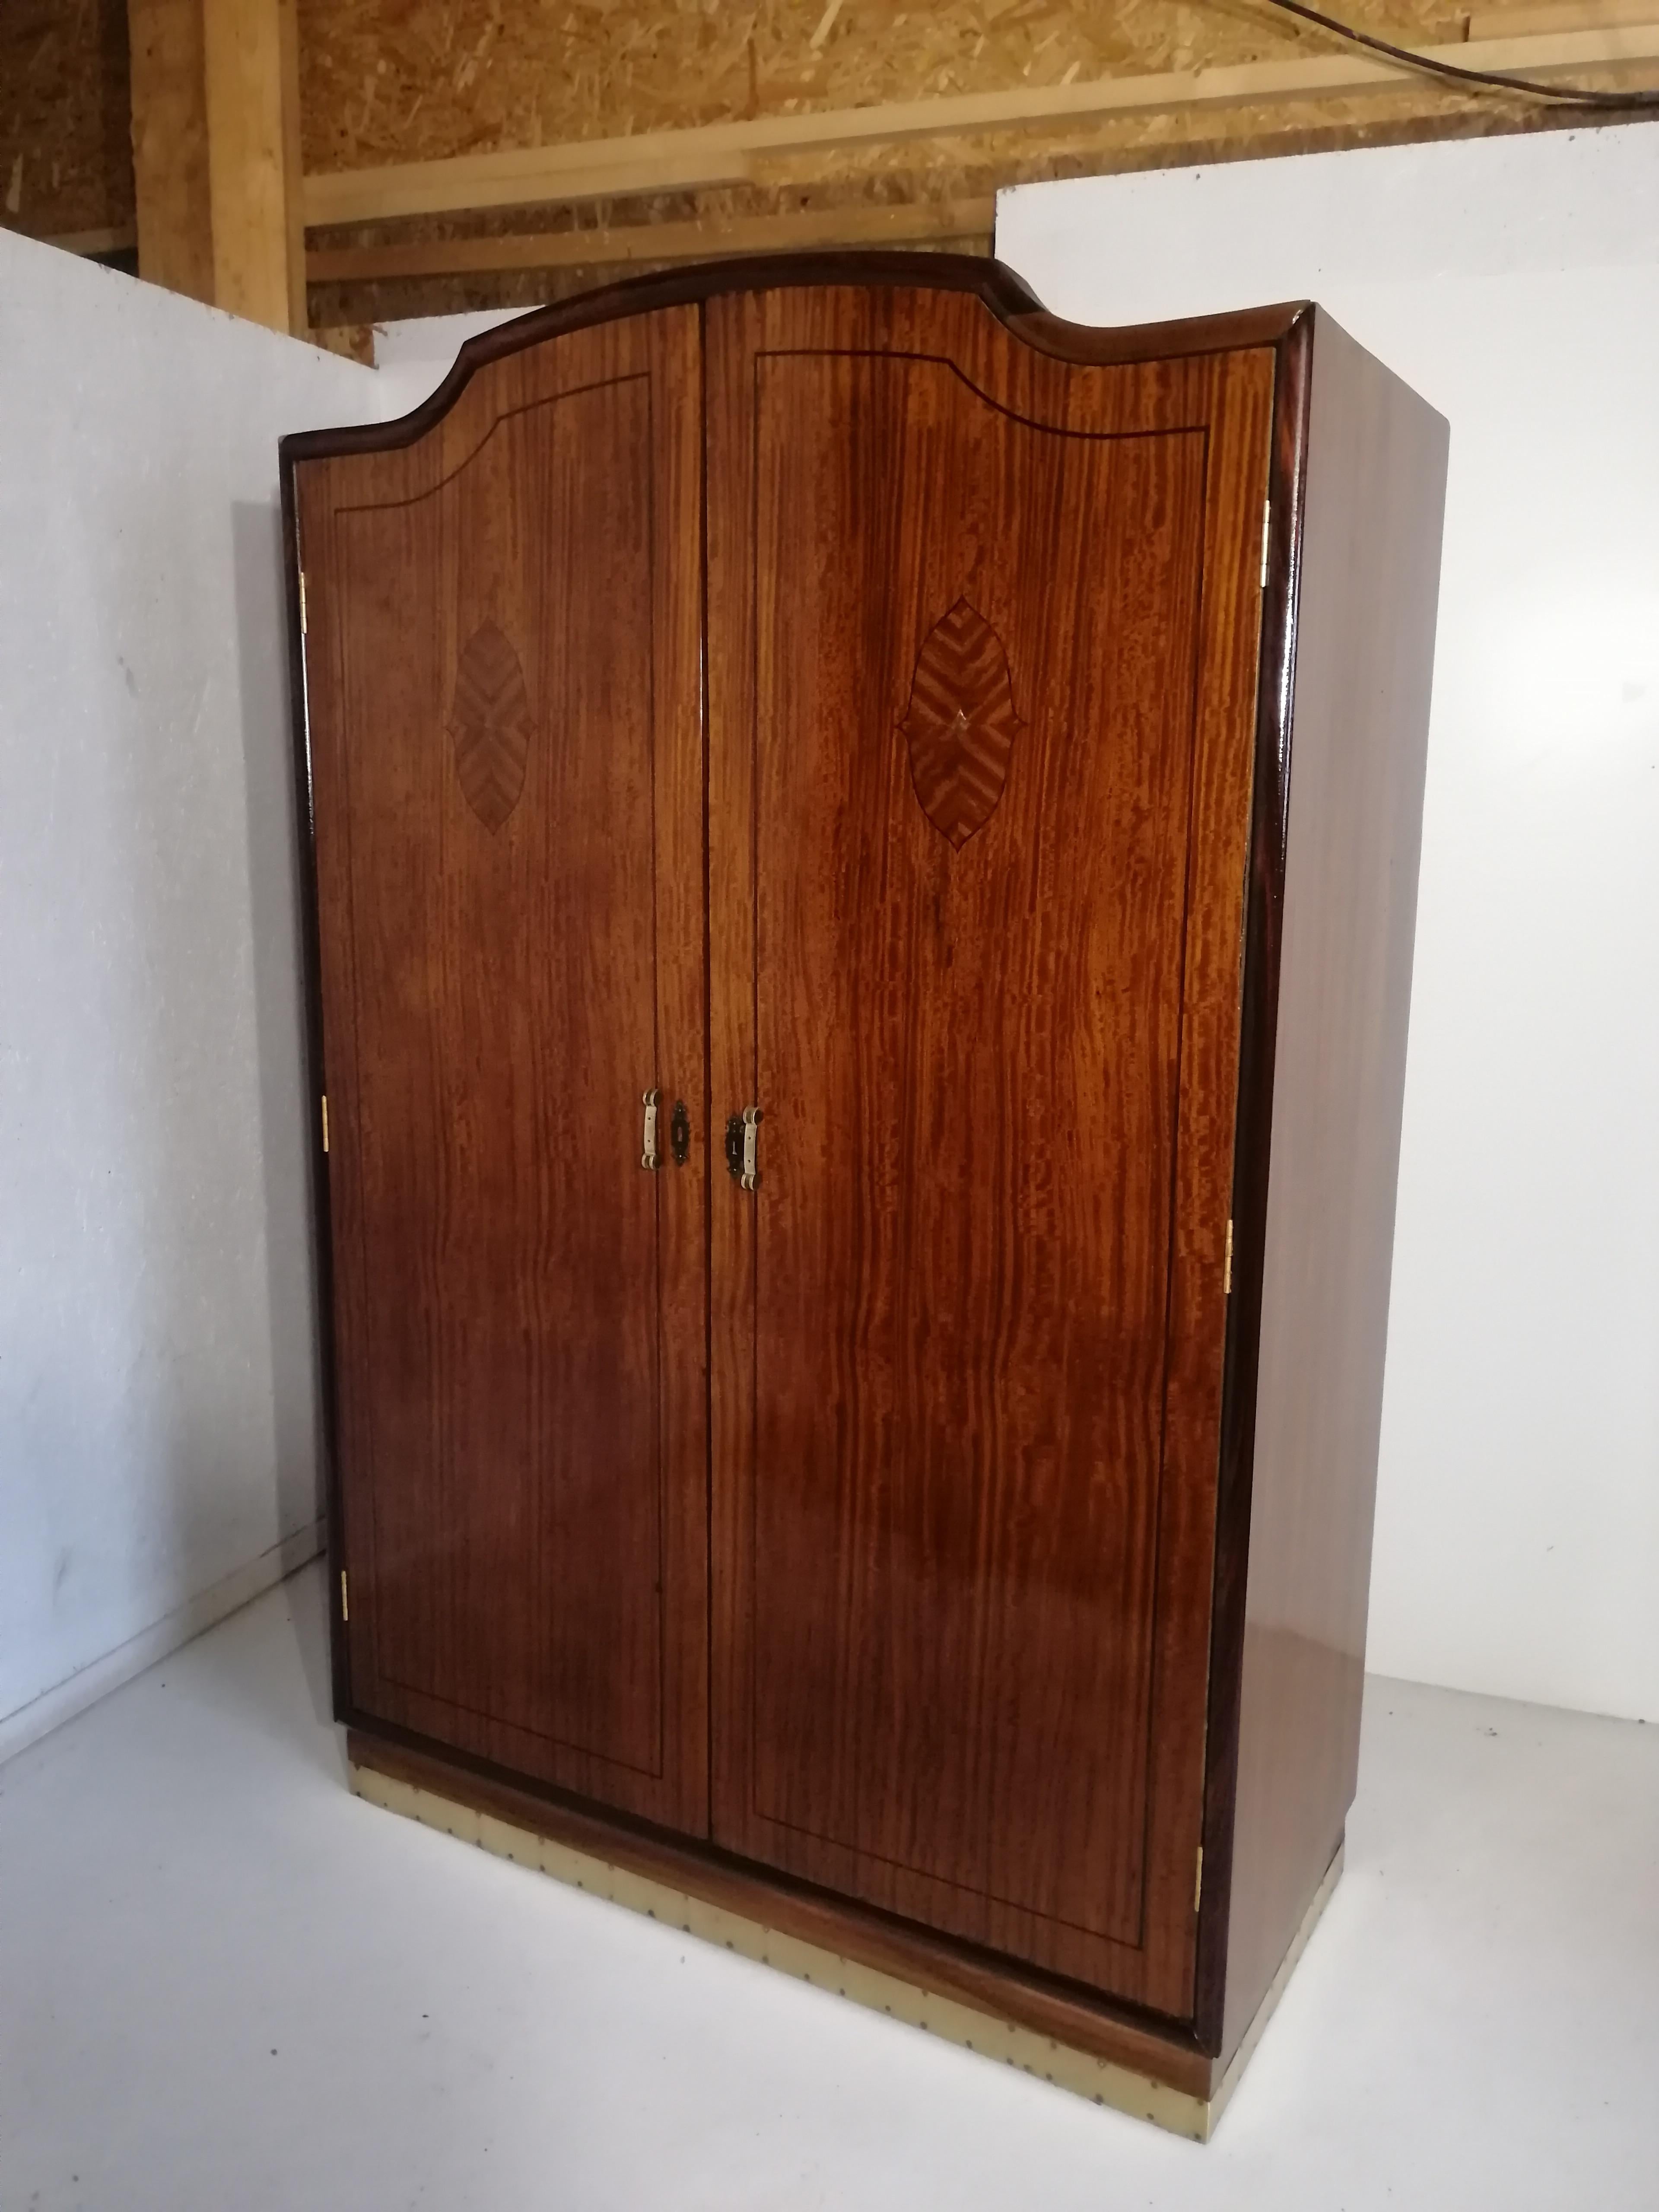 Art Nouveau rosewood wardrobe.

Second wardrobe on my second auction.

The furniture from our workshop is manually covered with high-gloss shellac Laquer.